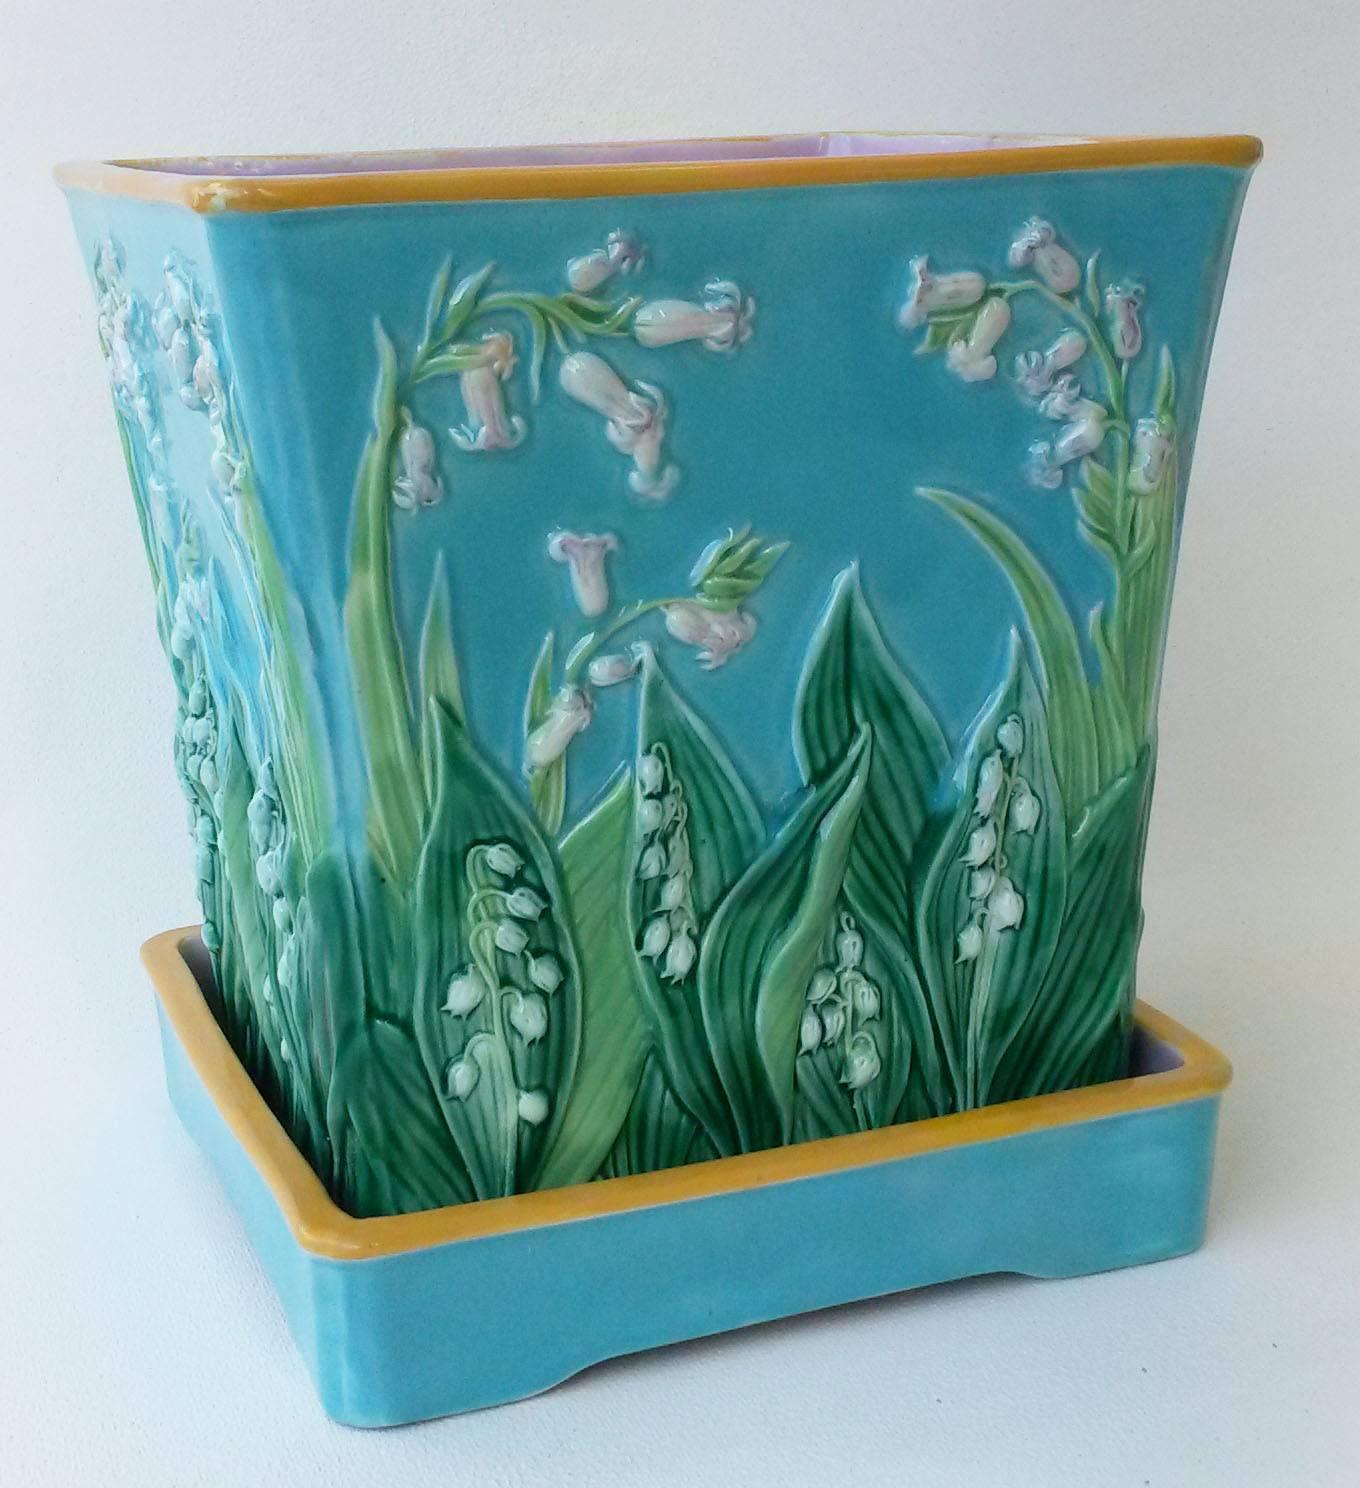 Victorian 19th century square complete Majolica jardinière with his underplate signed George Jones, Pattern No. 2295, the turquoise ground decorated with lilies of the valley in relief.
An excellent example of the elegance of the Victorian